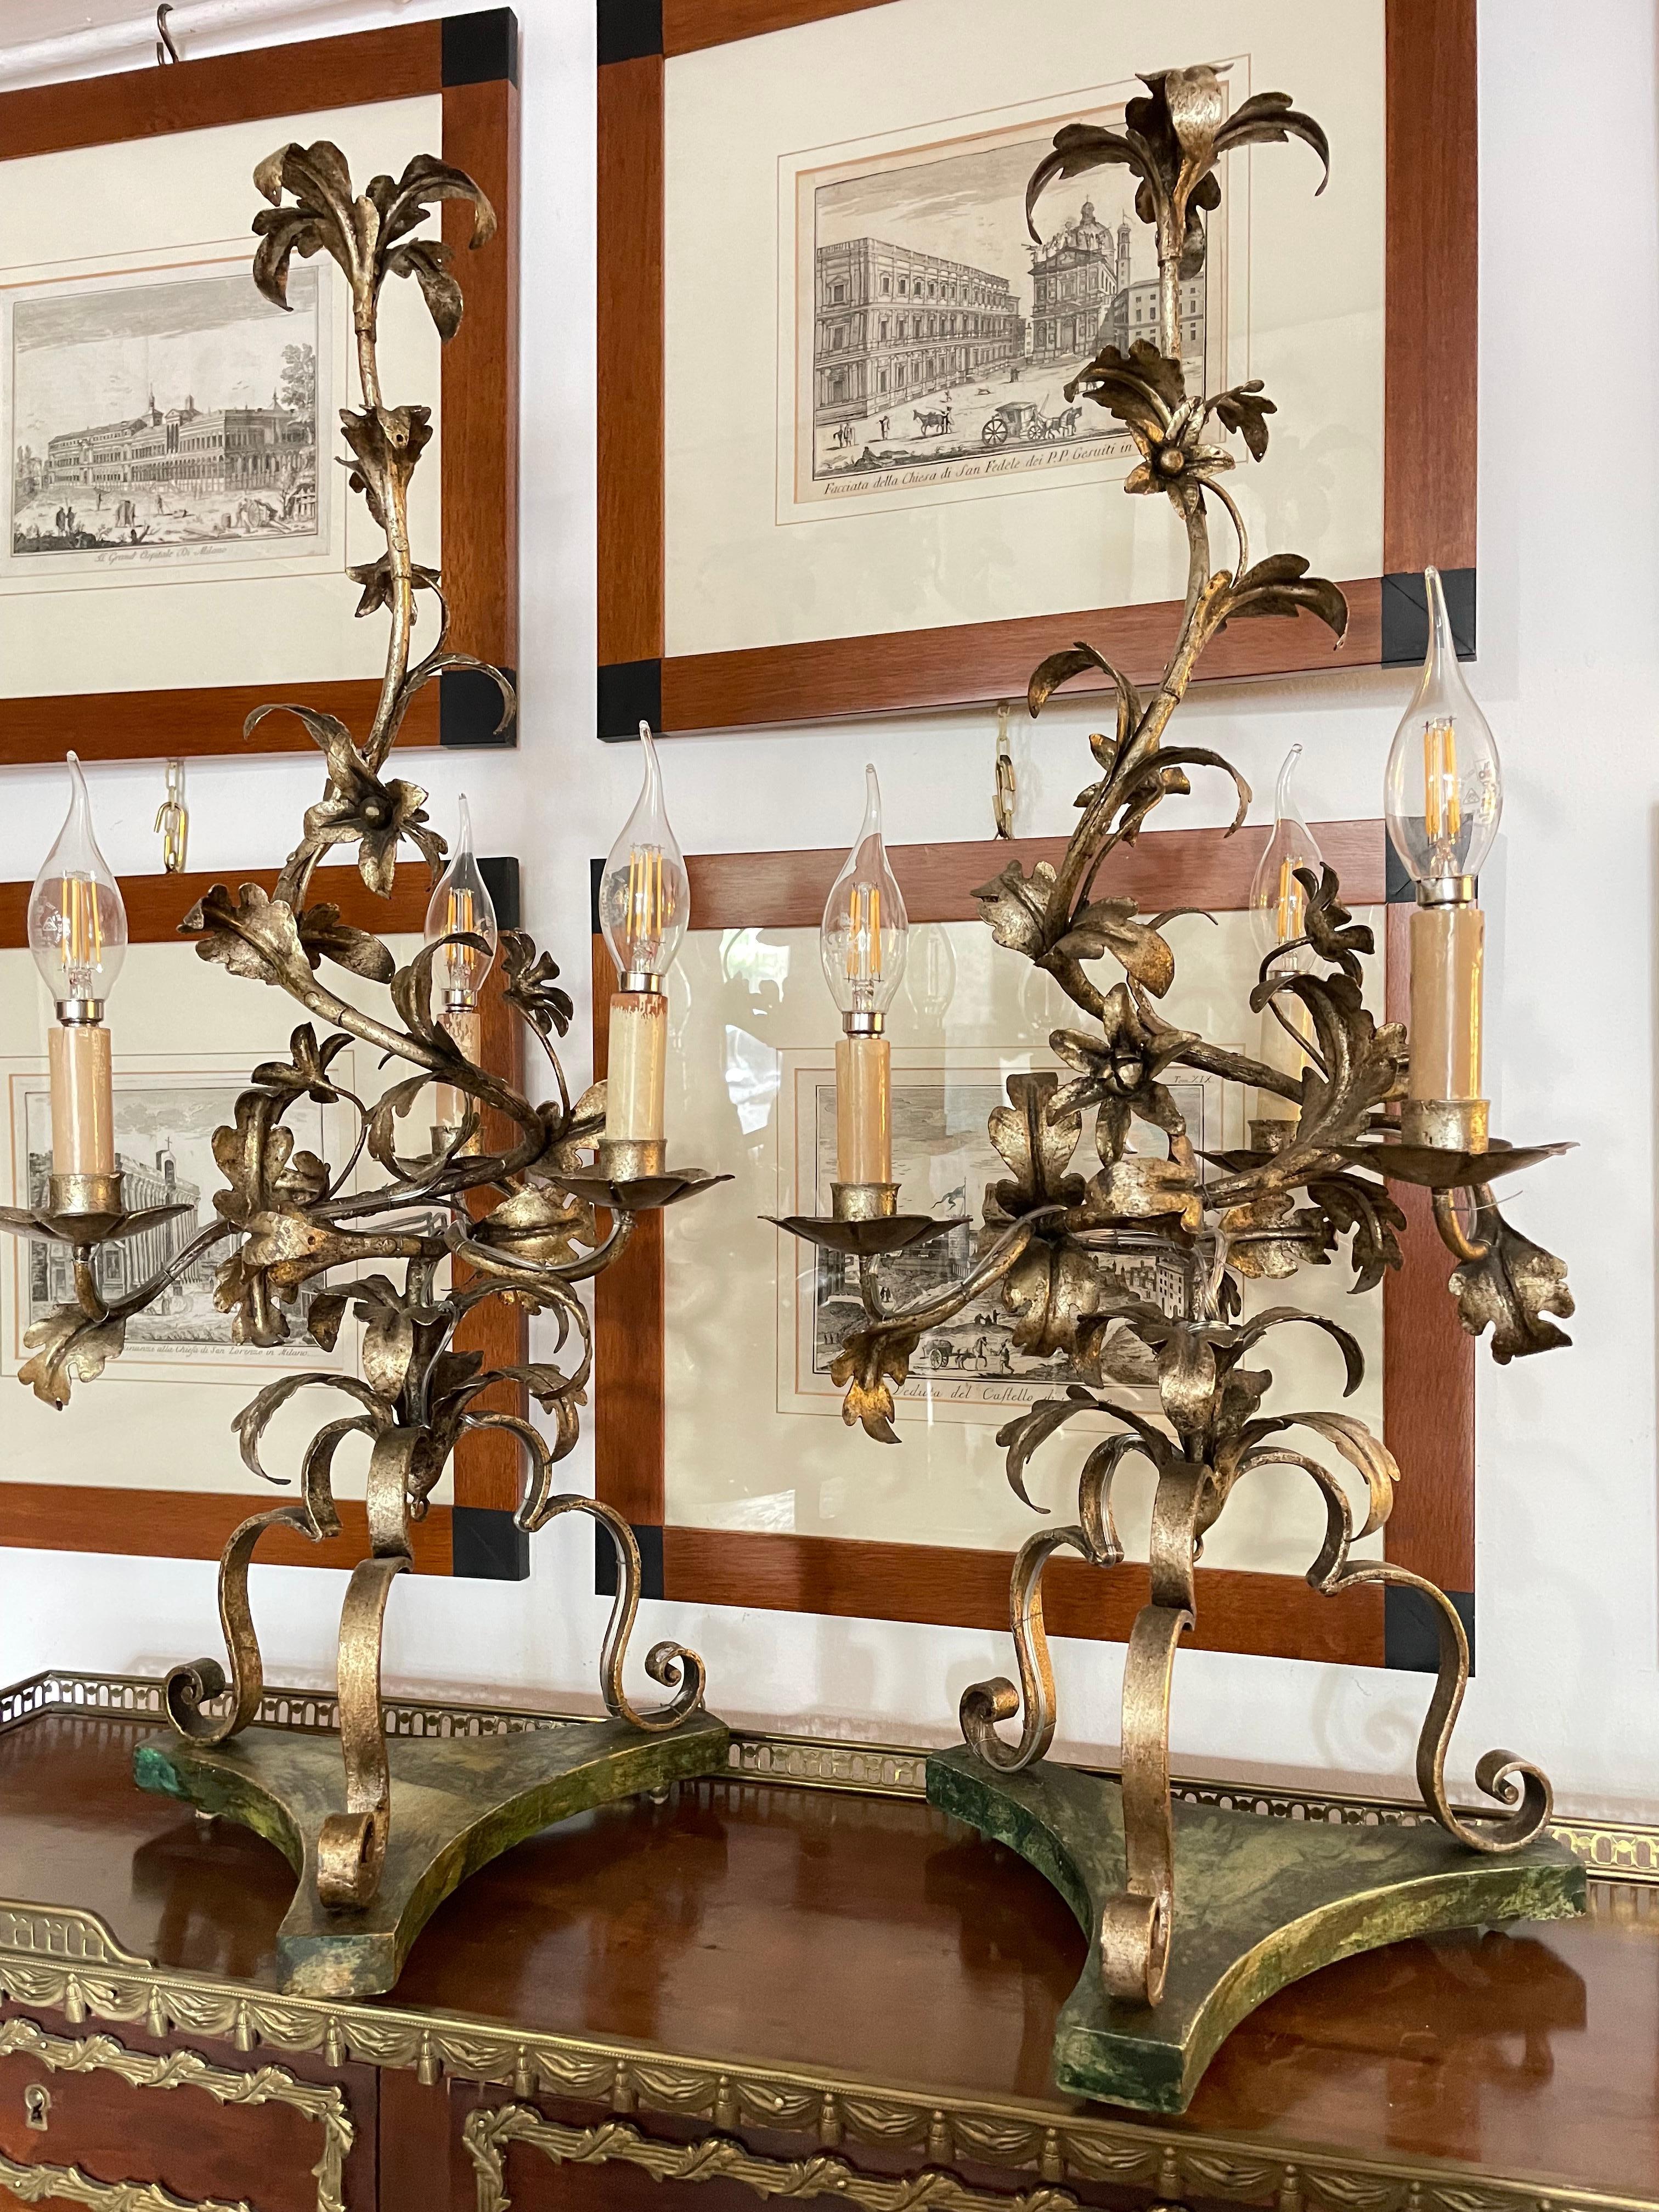 Pair of 20th century Italian wrought iron candelabra, with a warm beautiful mecca silver-leaf finish, two floral and foliate three-light table lamps, set on shaped wooden bases with green faux marble finish. 

Both artworks are fully handmade,